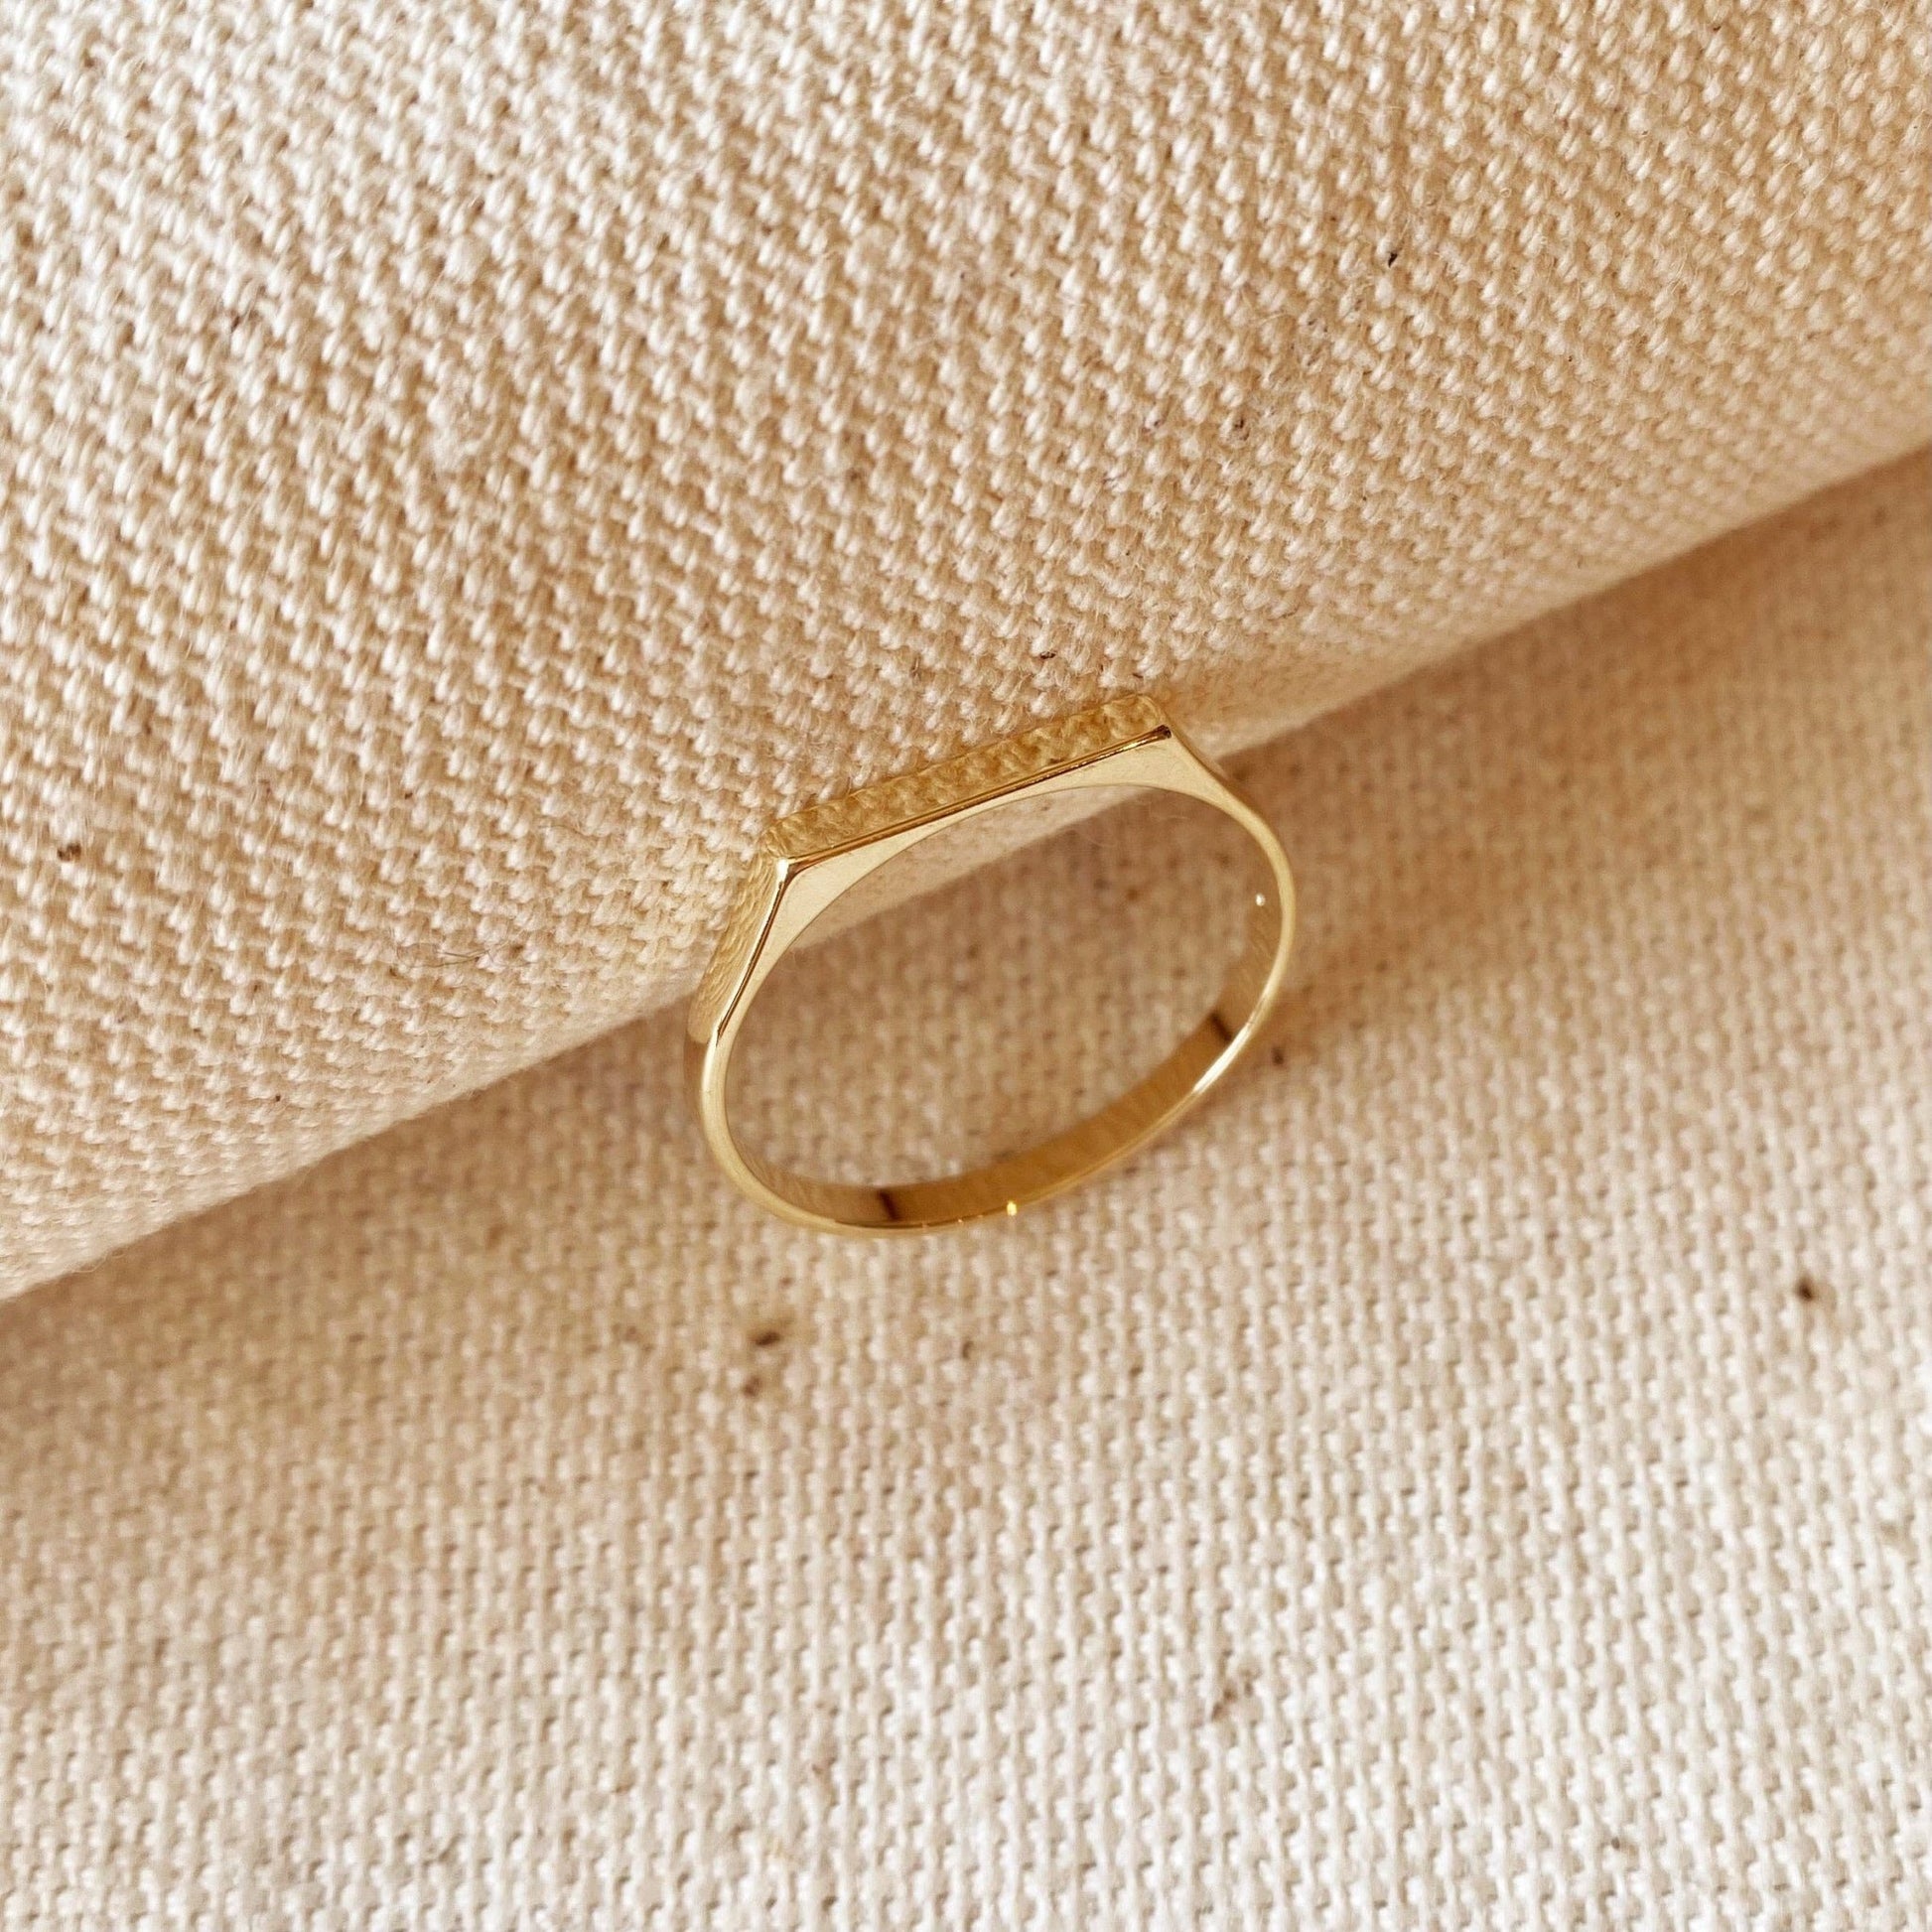 18k Gold Filled Flat Top Ring: 7 - FOREVERLINKX